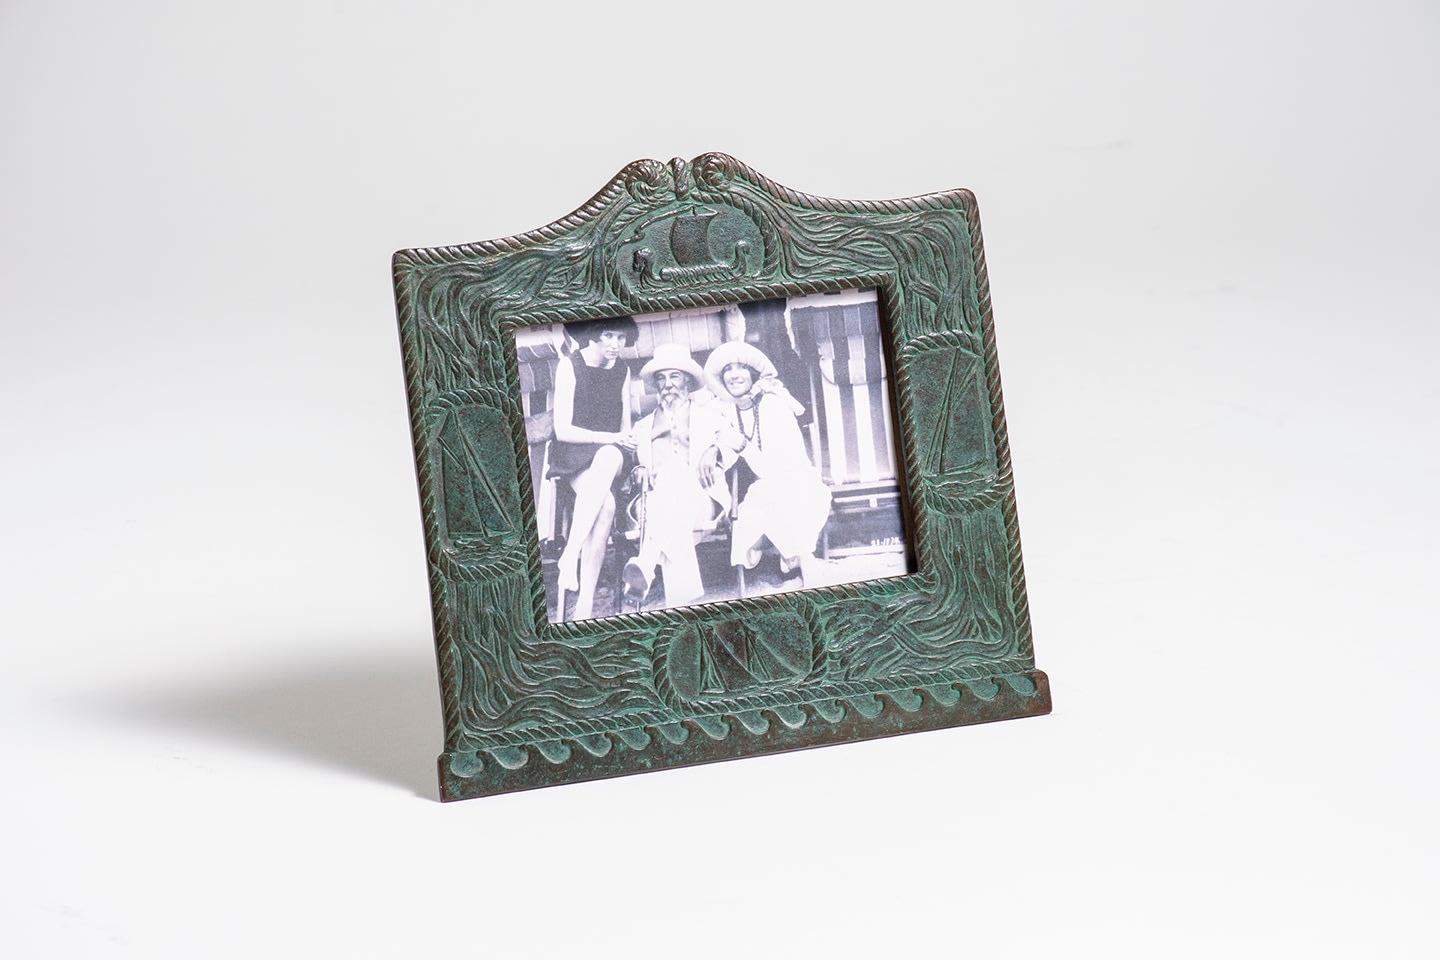 a low rectangular calendar frame from tiffany studios &quot;nautical&quot; desk set, the bronze in a green patina, the frame borders depicting maritime motifs including kelp, rope, and depictions of various sailing ships